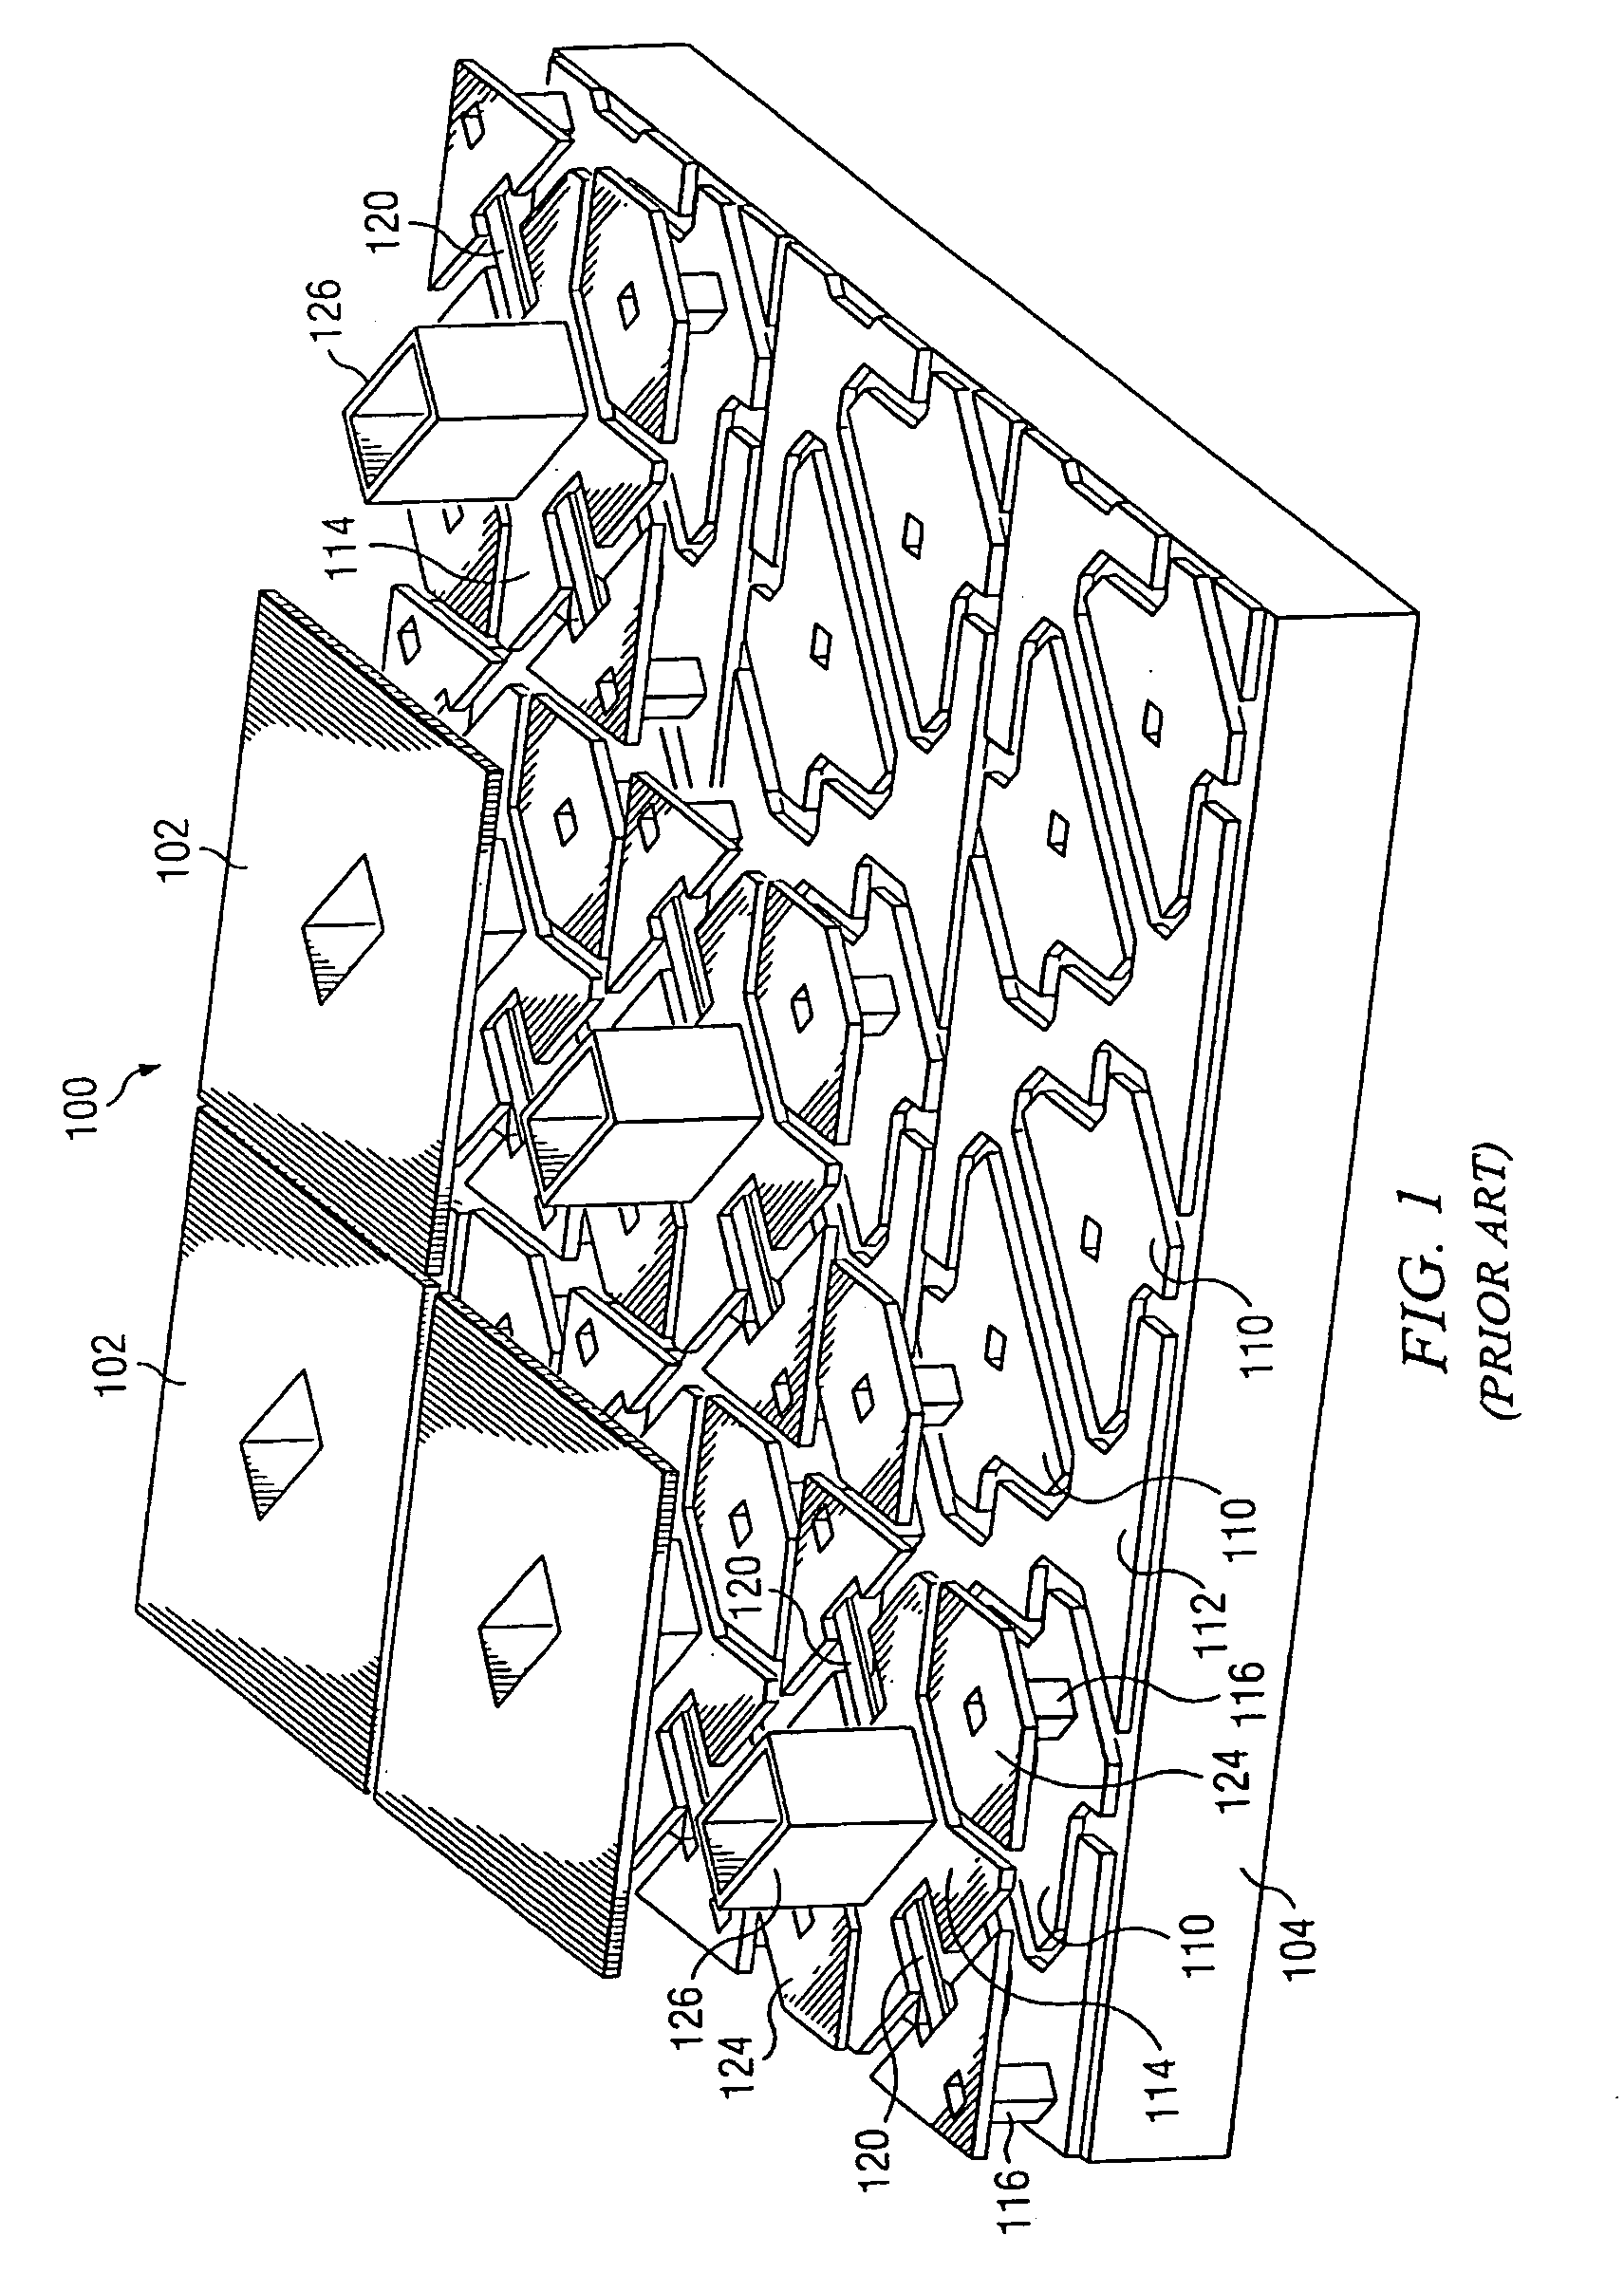 Digital micromirror device with simplified drive electronics for use as temporal light modulator